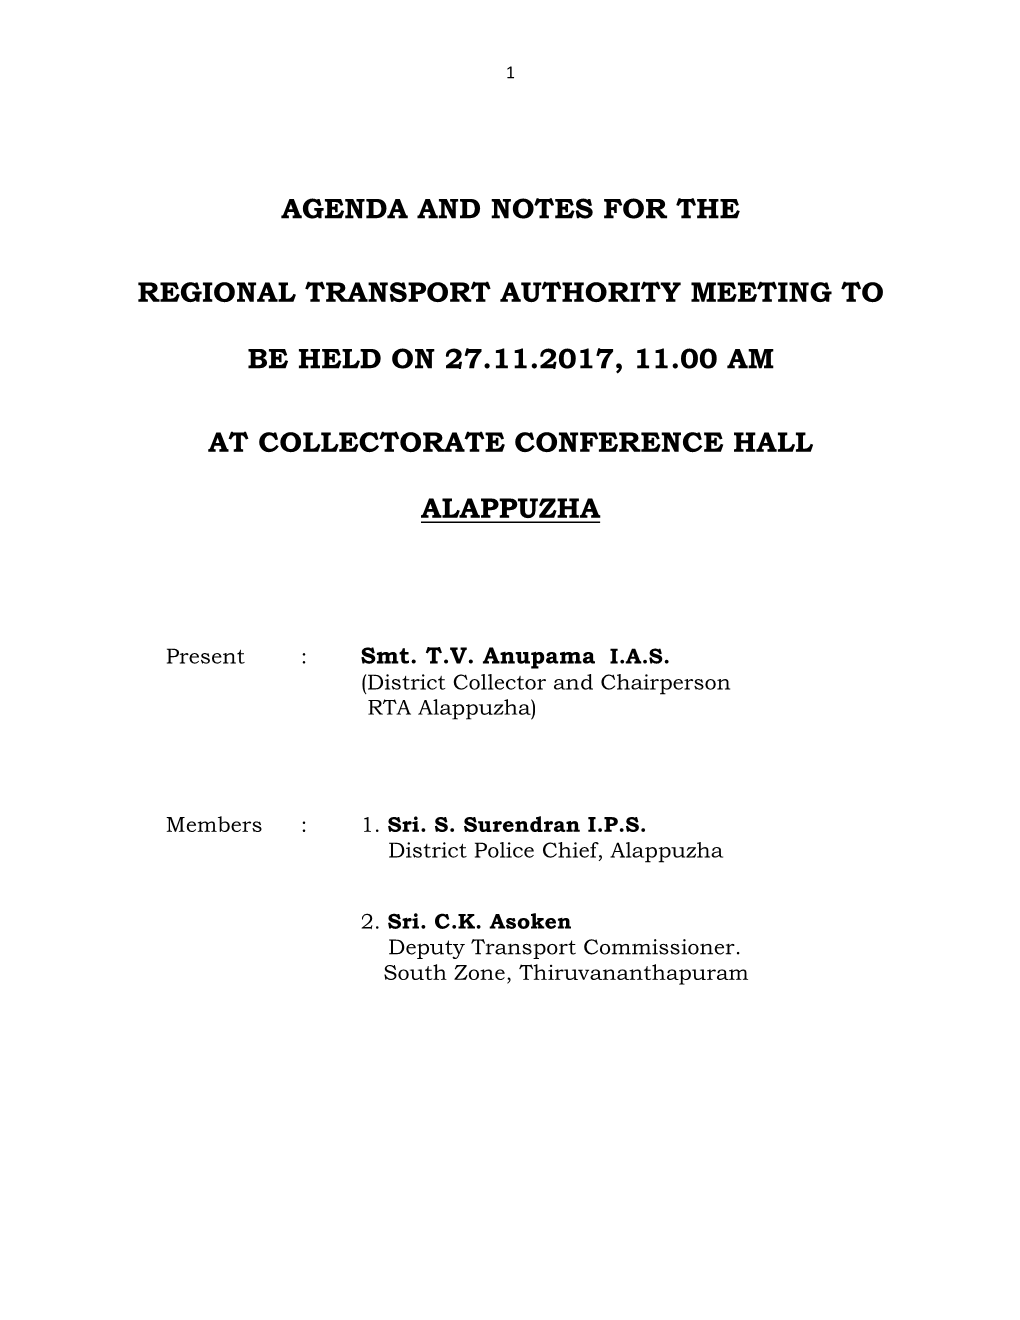 Agenda and Notes for the Regional Transport